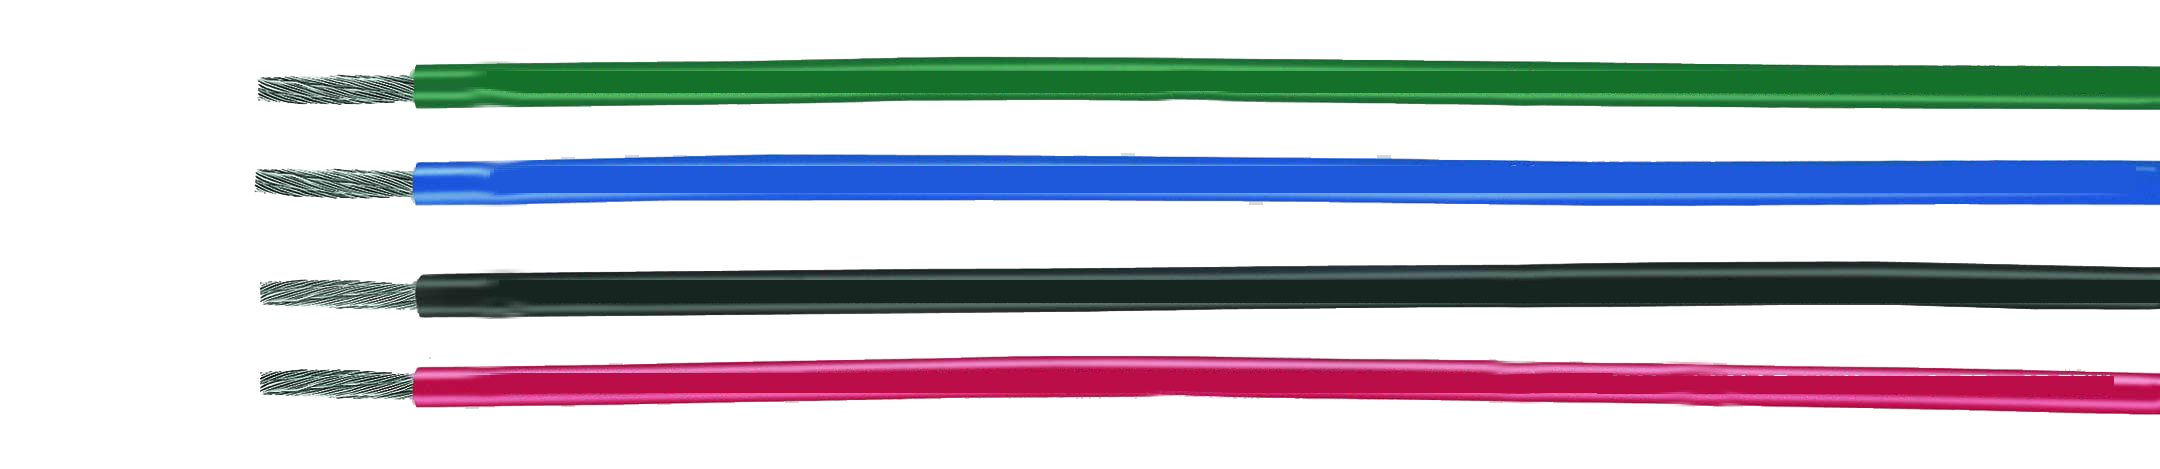 UL-Style 1015 PVC single conductors, 600V, RoHS Approved, RoHS Compliant, European  , Sealcon